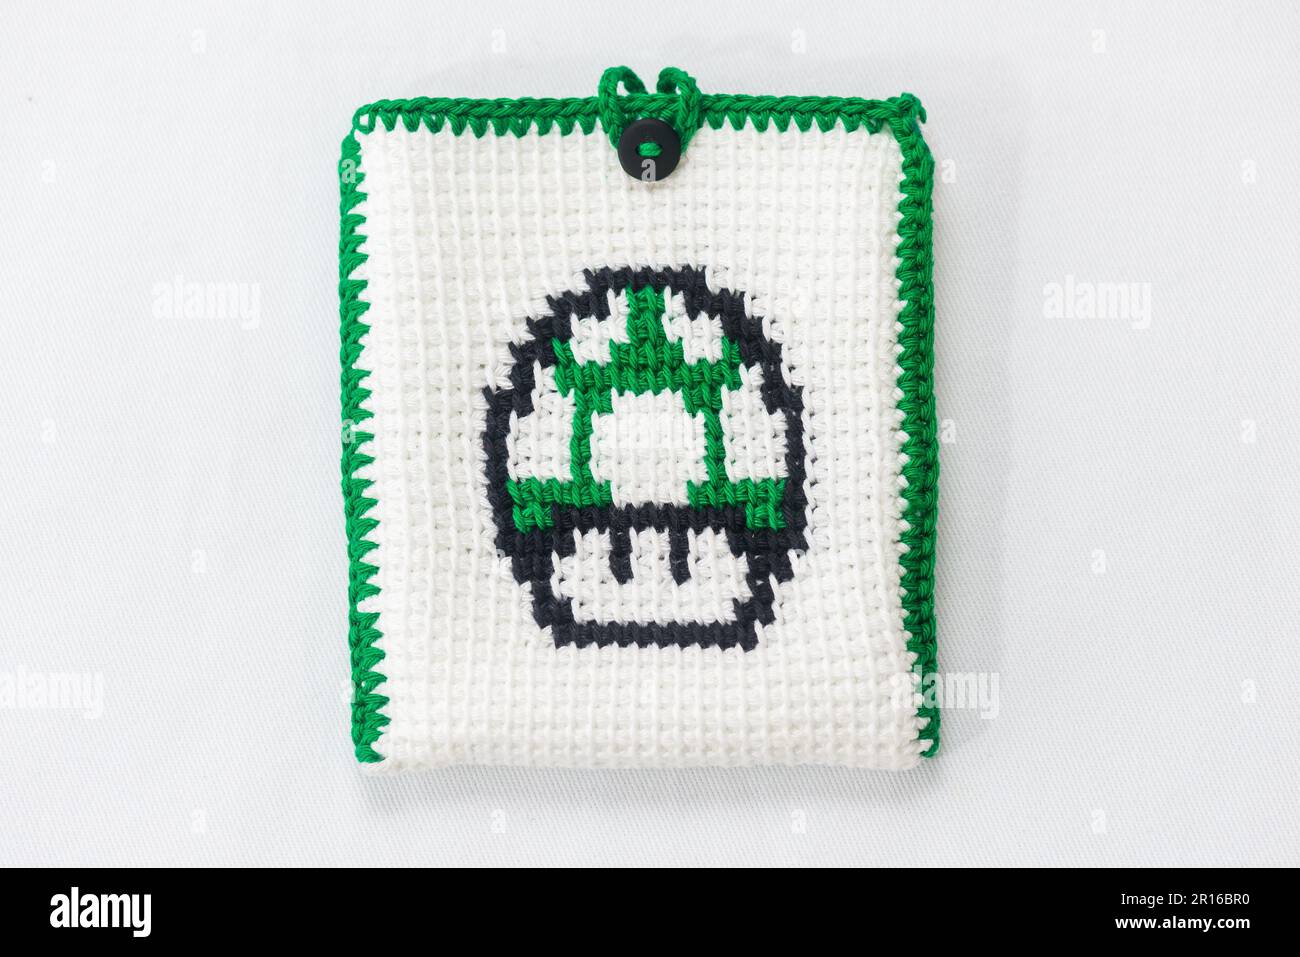 envelope for external hard drive, crocheted with a green mushroom drawn Stock Photo